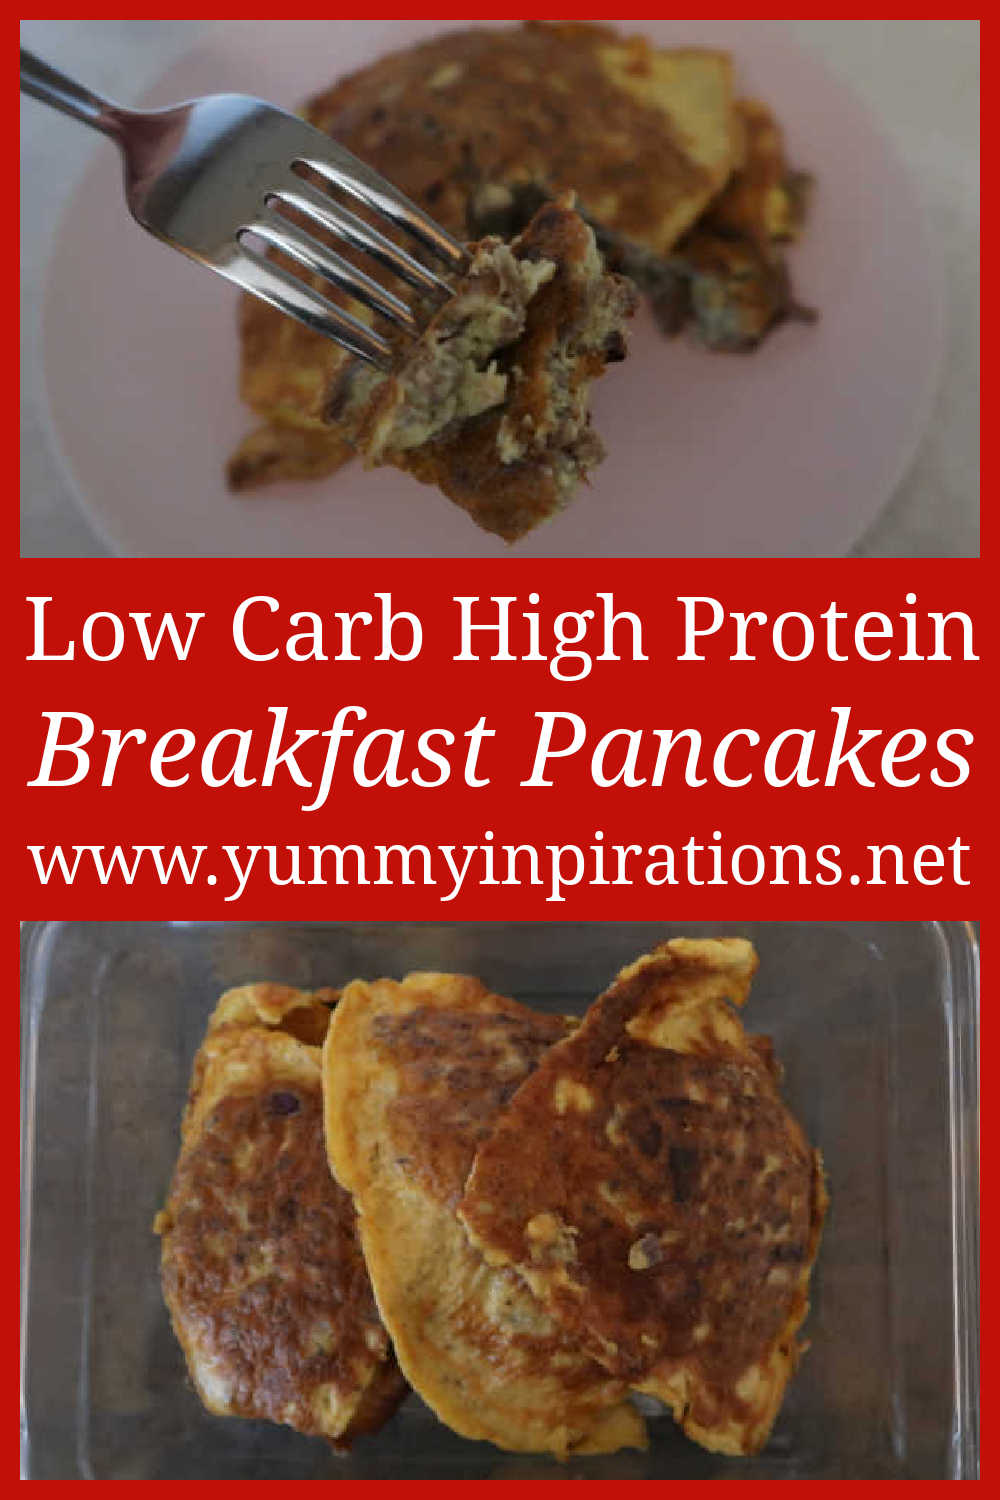 Pancakes With Meat Recipe - How to make easy crispy low carb high protein breakfast pancake recipes with ground beef - with the video tutorial.